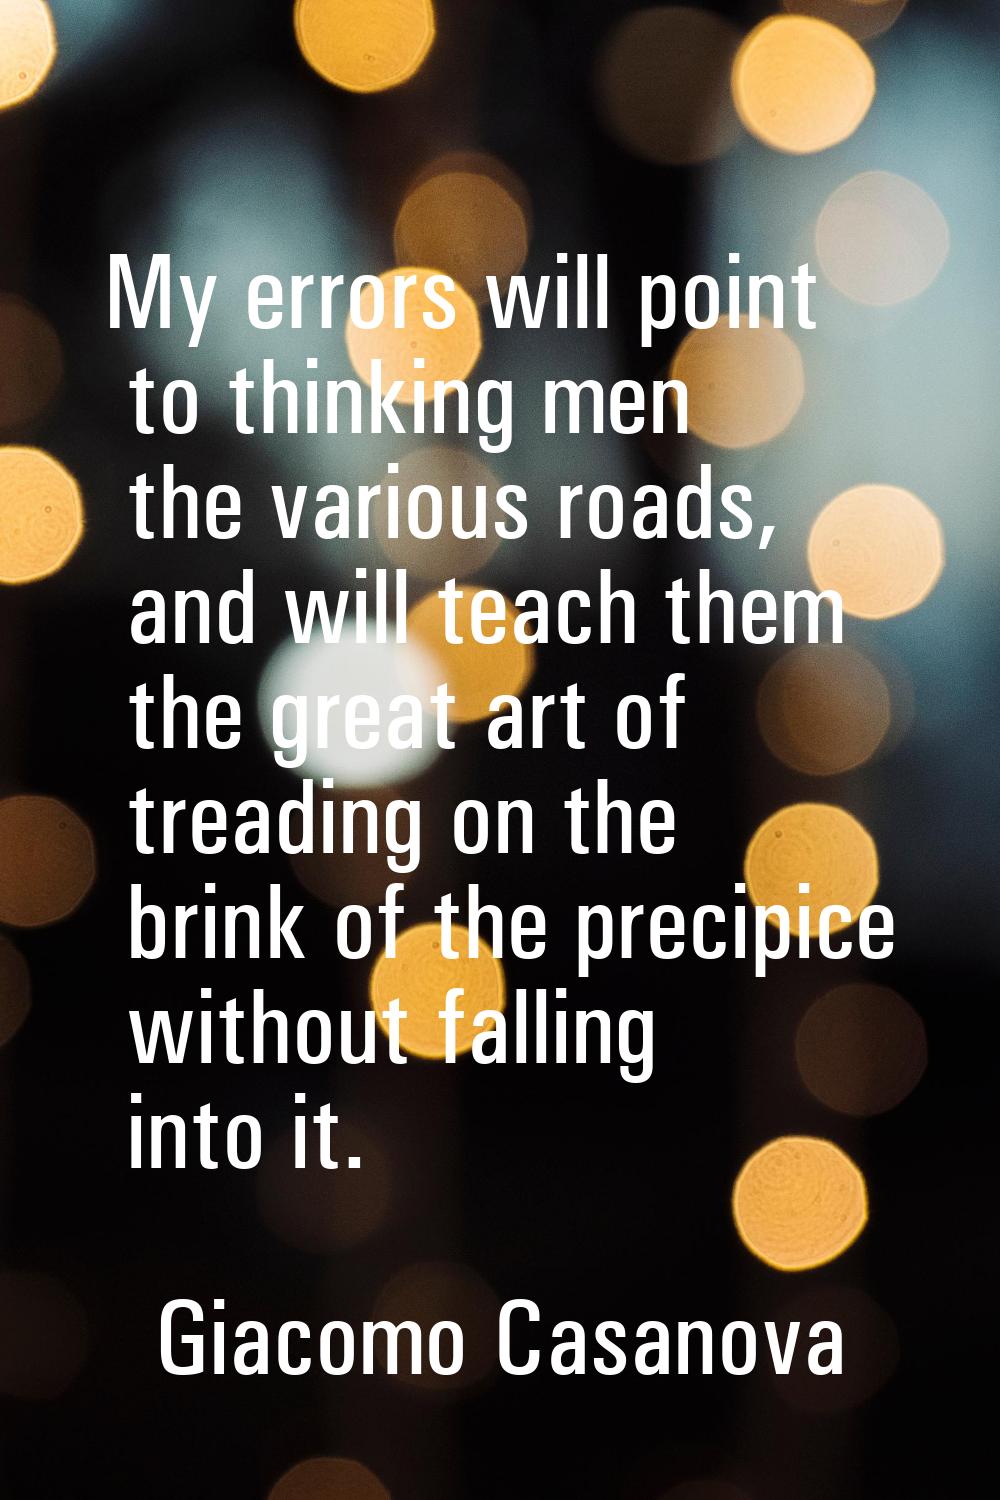 My errors will point to thinking men the various roads, and will teach them the great art of treadi